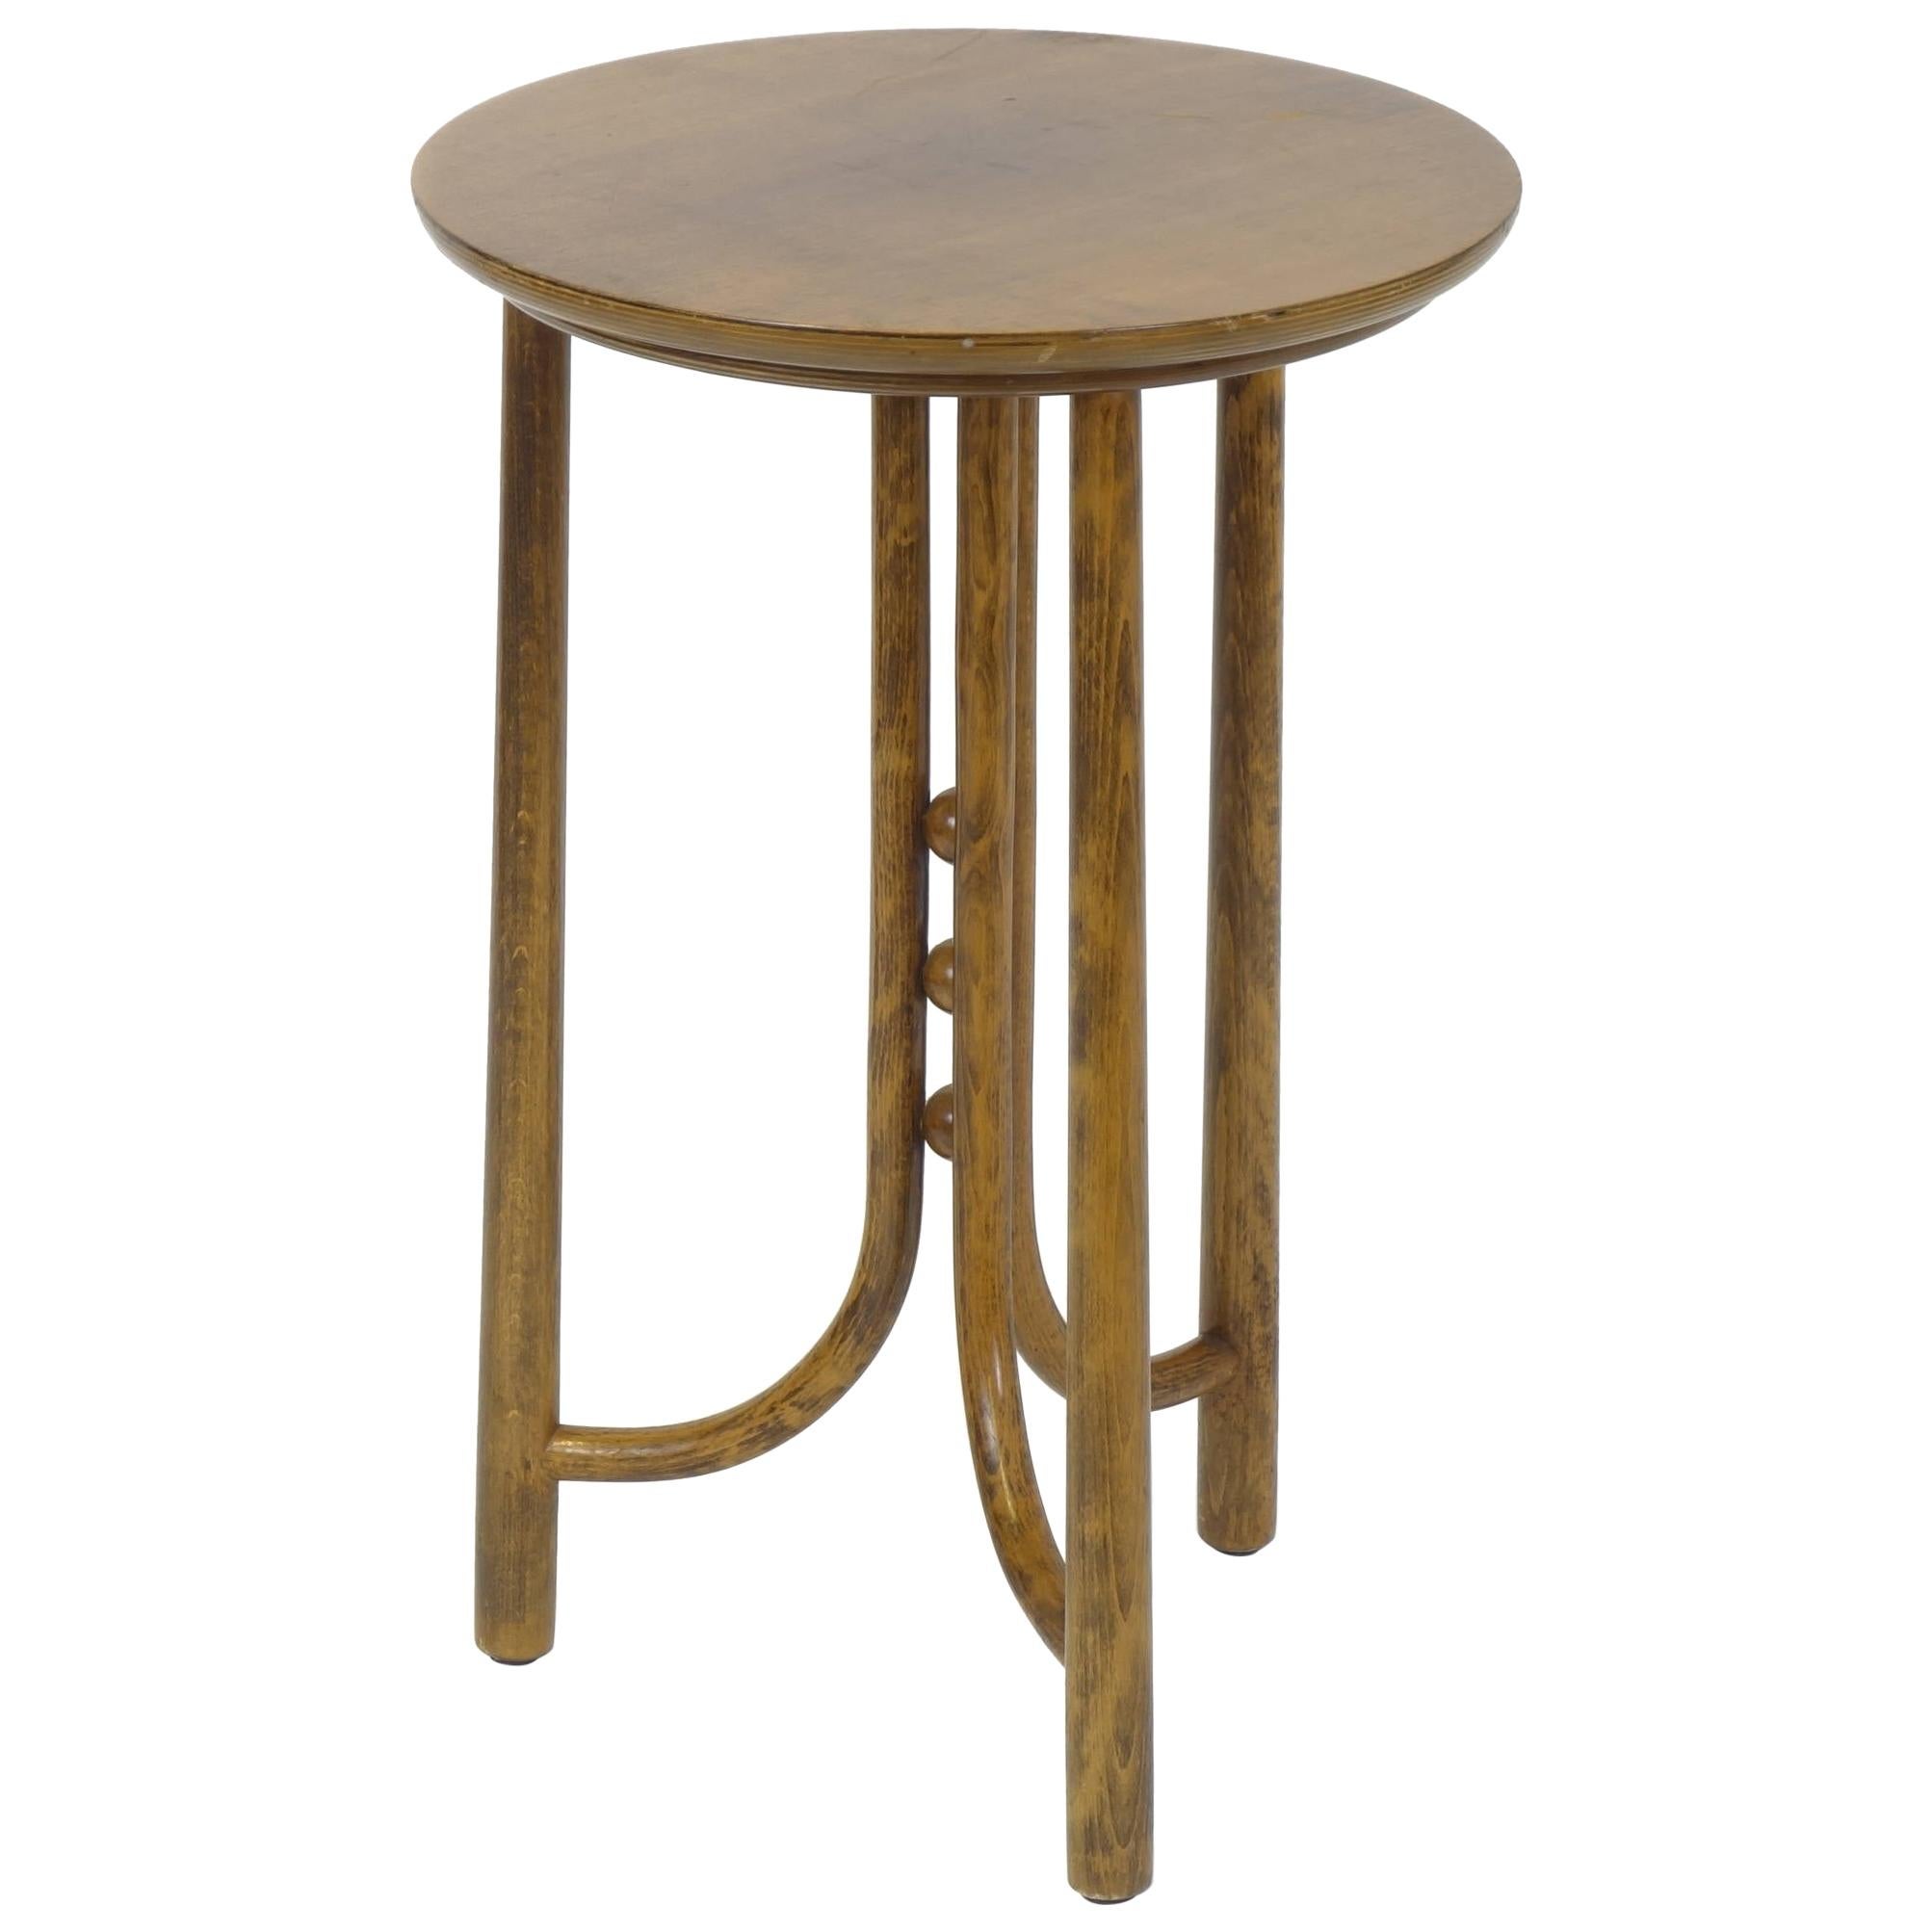 20th Century Sidetable in the Manner of Josef Hoffmann